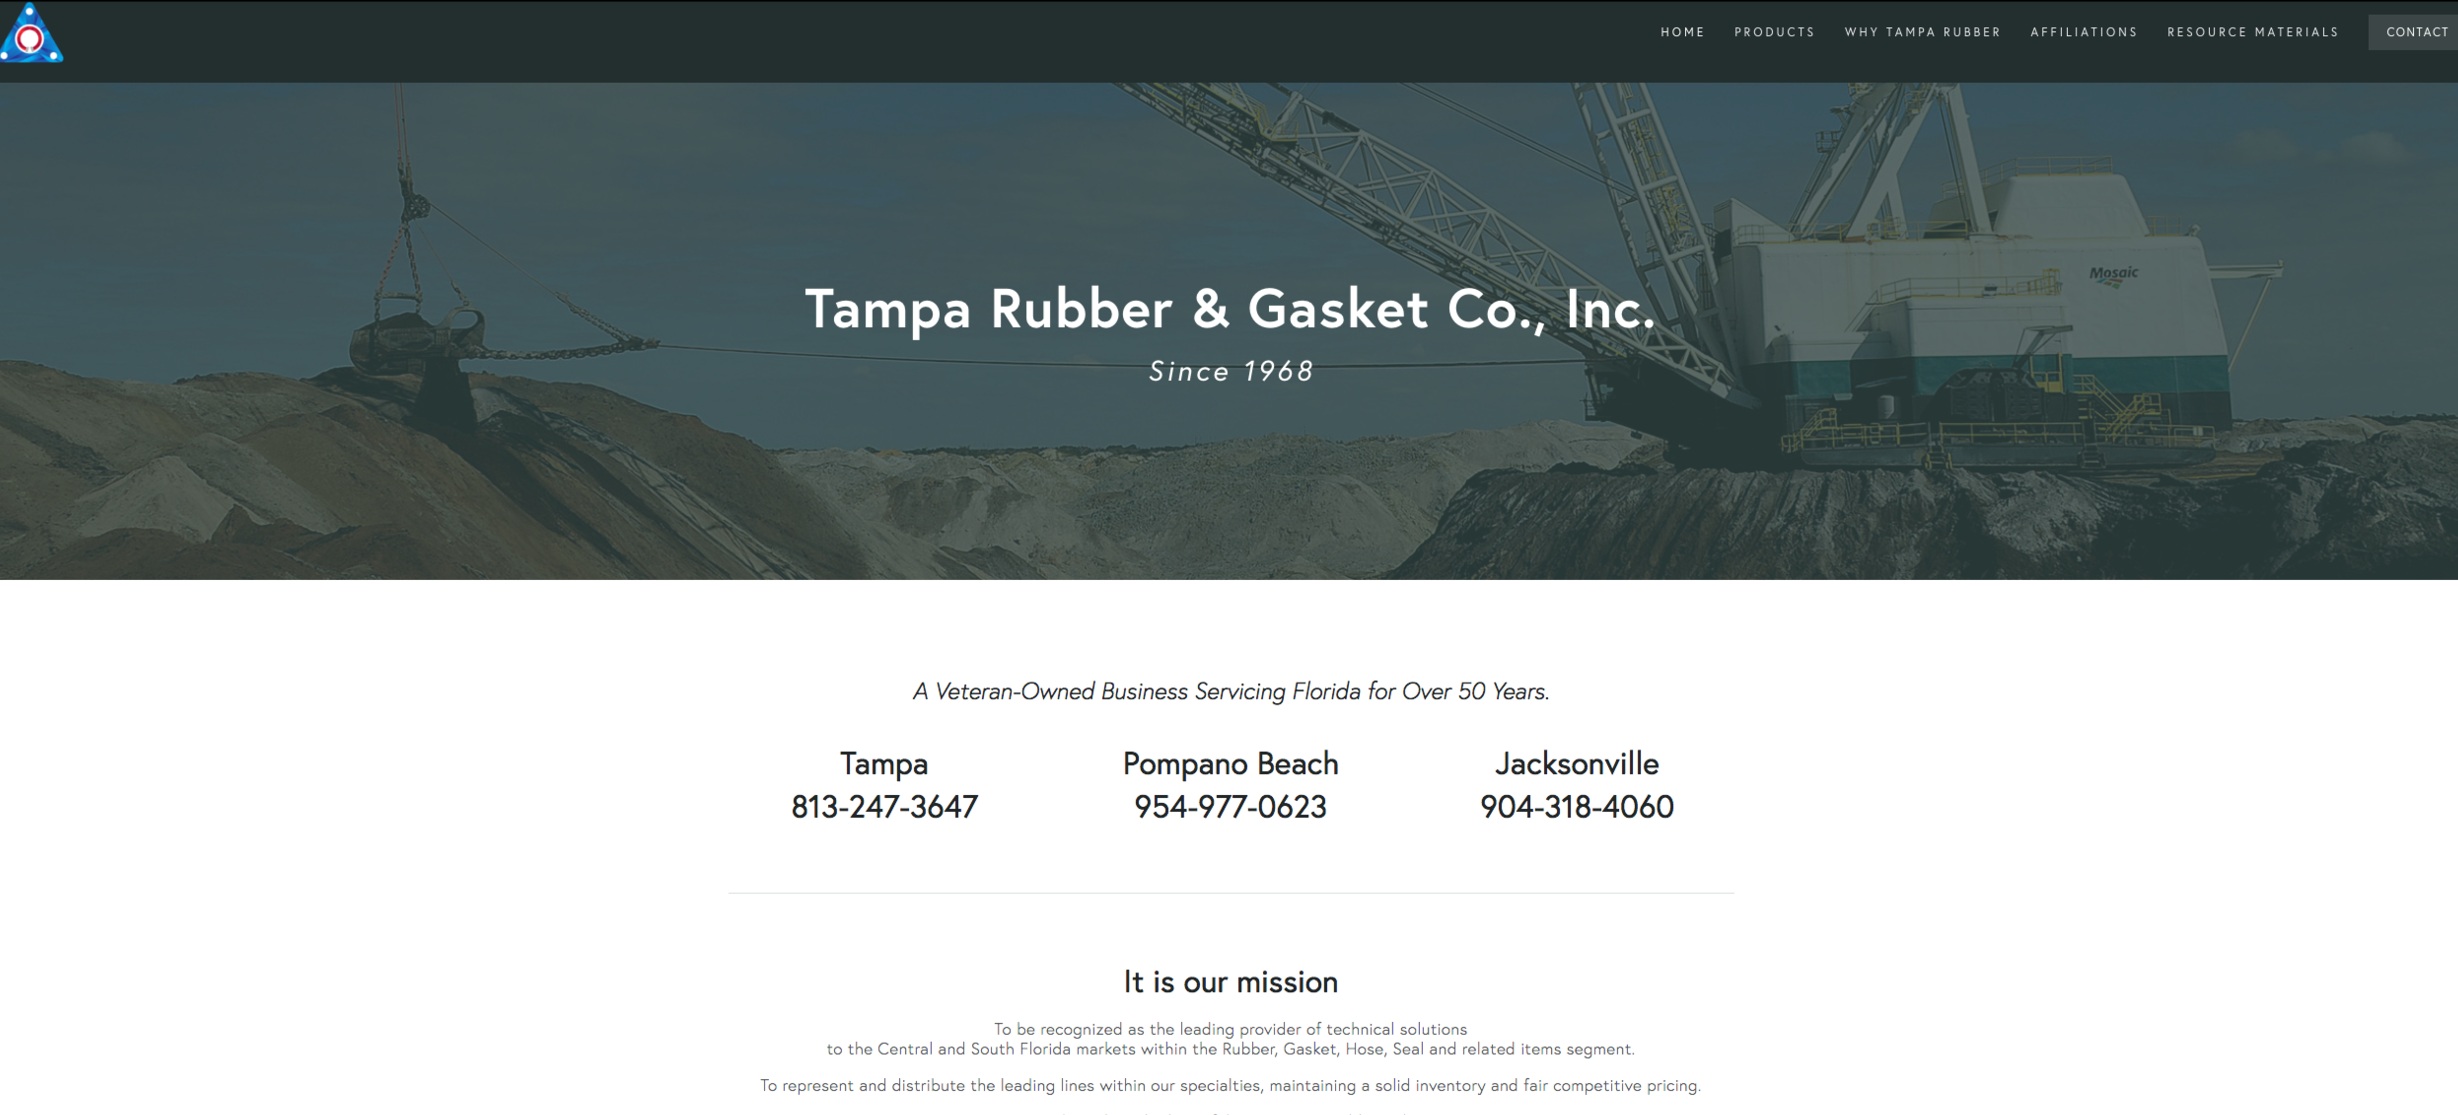 Tampa Rubber & Gasket